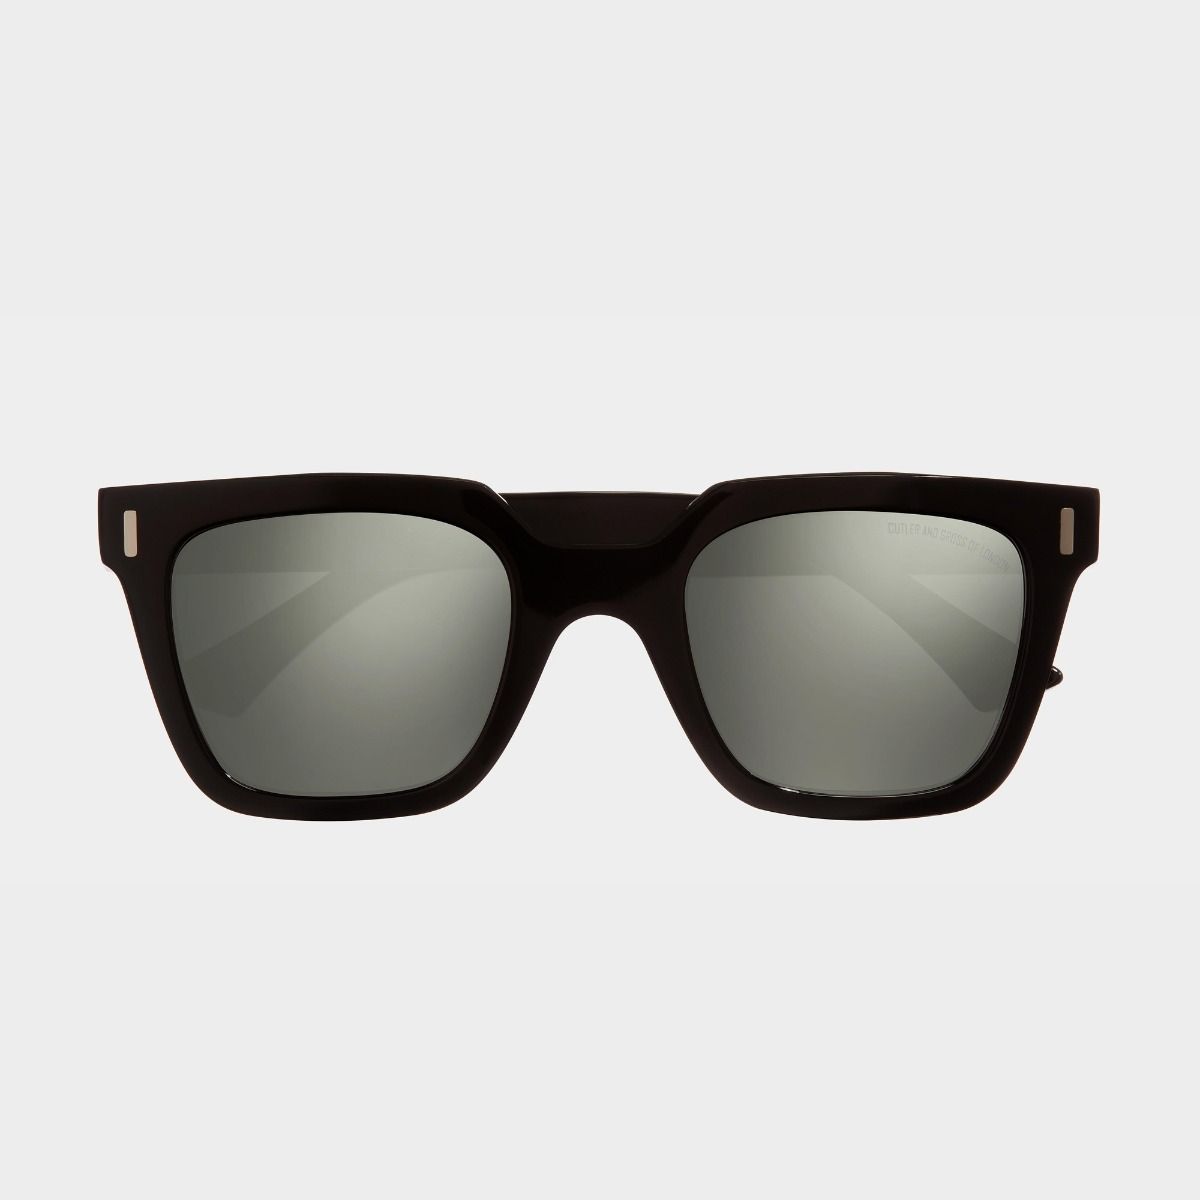 Cutler and Gross, 1305 Square Sunglasses - Black